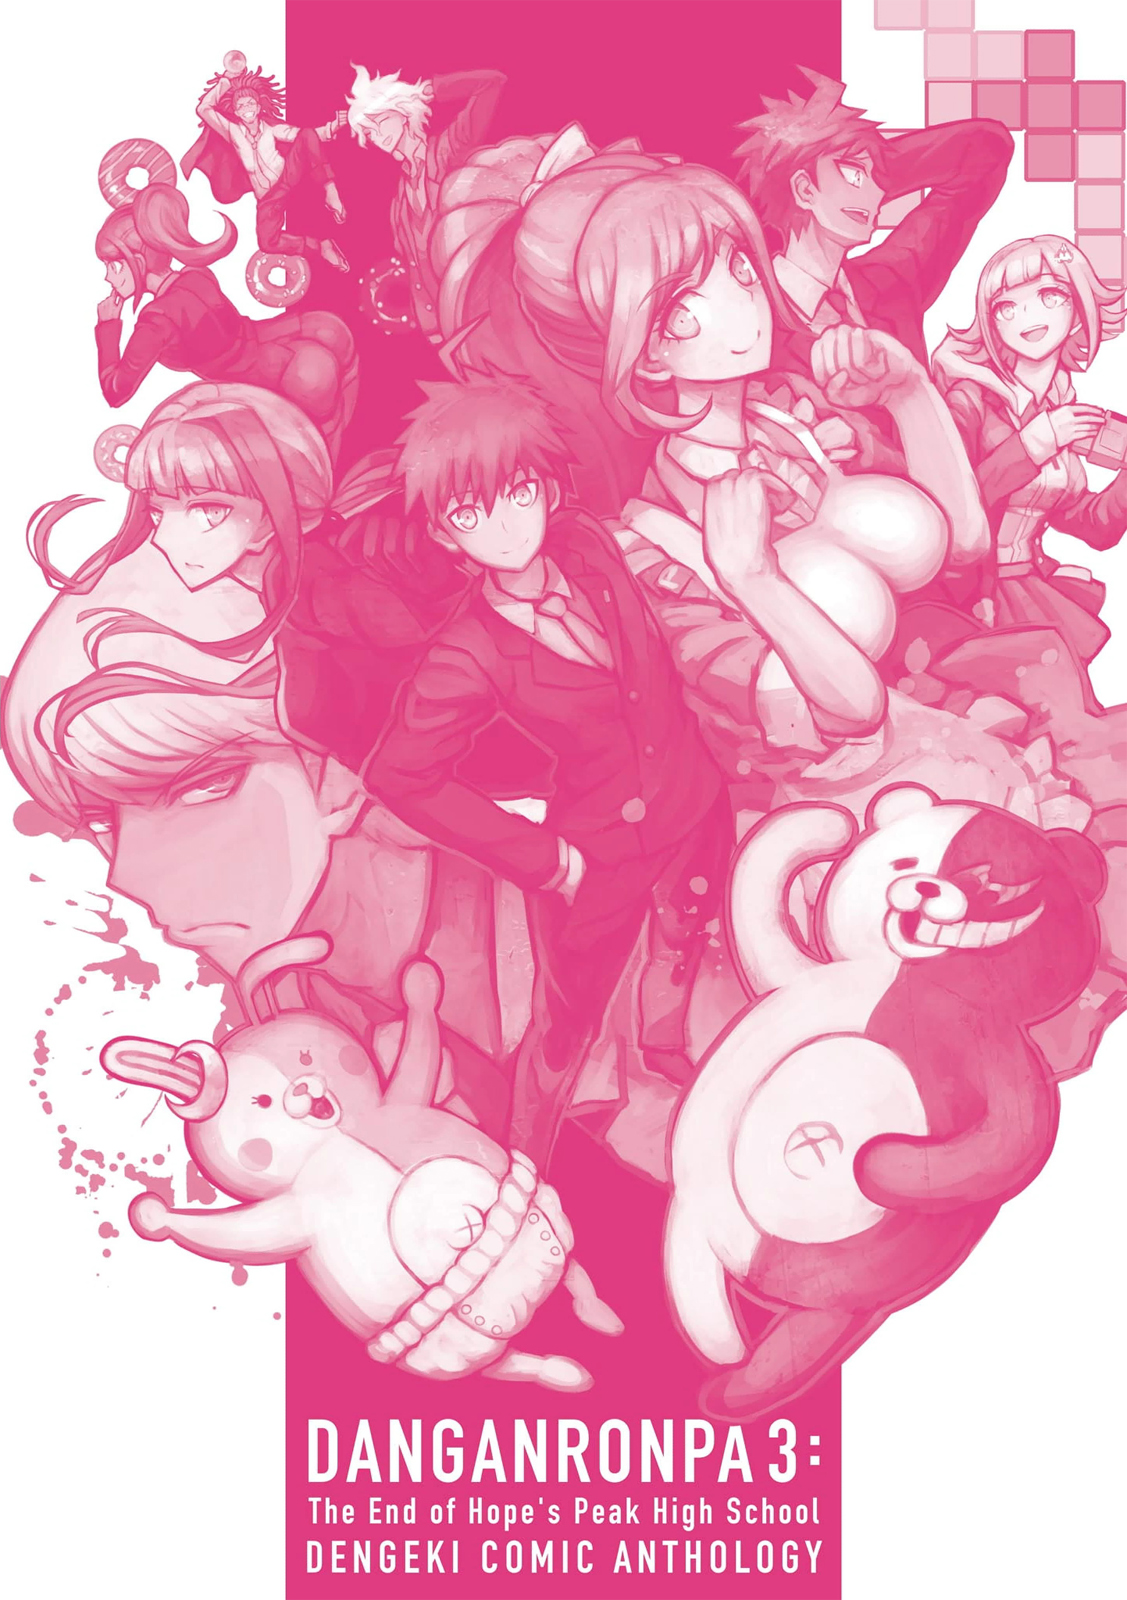 Danganronpa 3: The End of Hope's Peak Academy Future Arc & Despair Arc Comic Anthology (Dengeki Comics EX) Vol. 1 Ch. 21 Let's Live Youth to the Fullest by Totofumi (End)